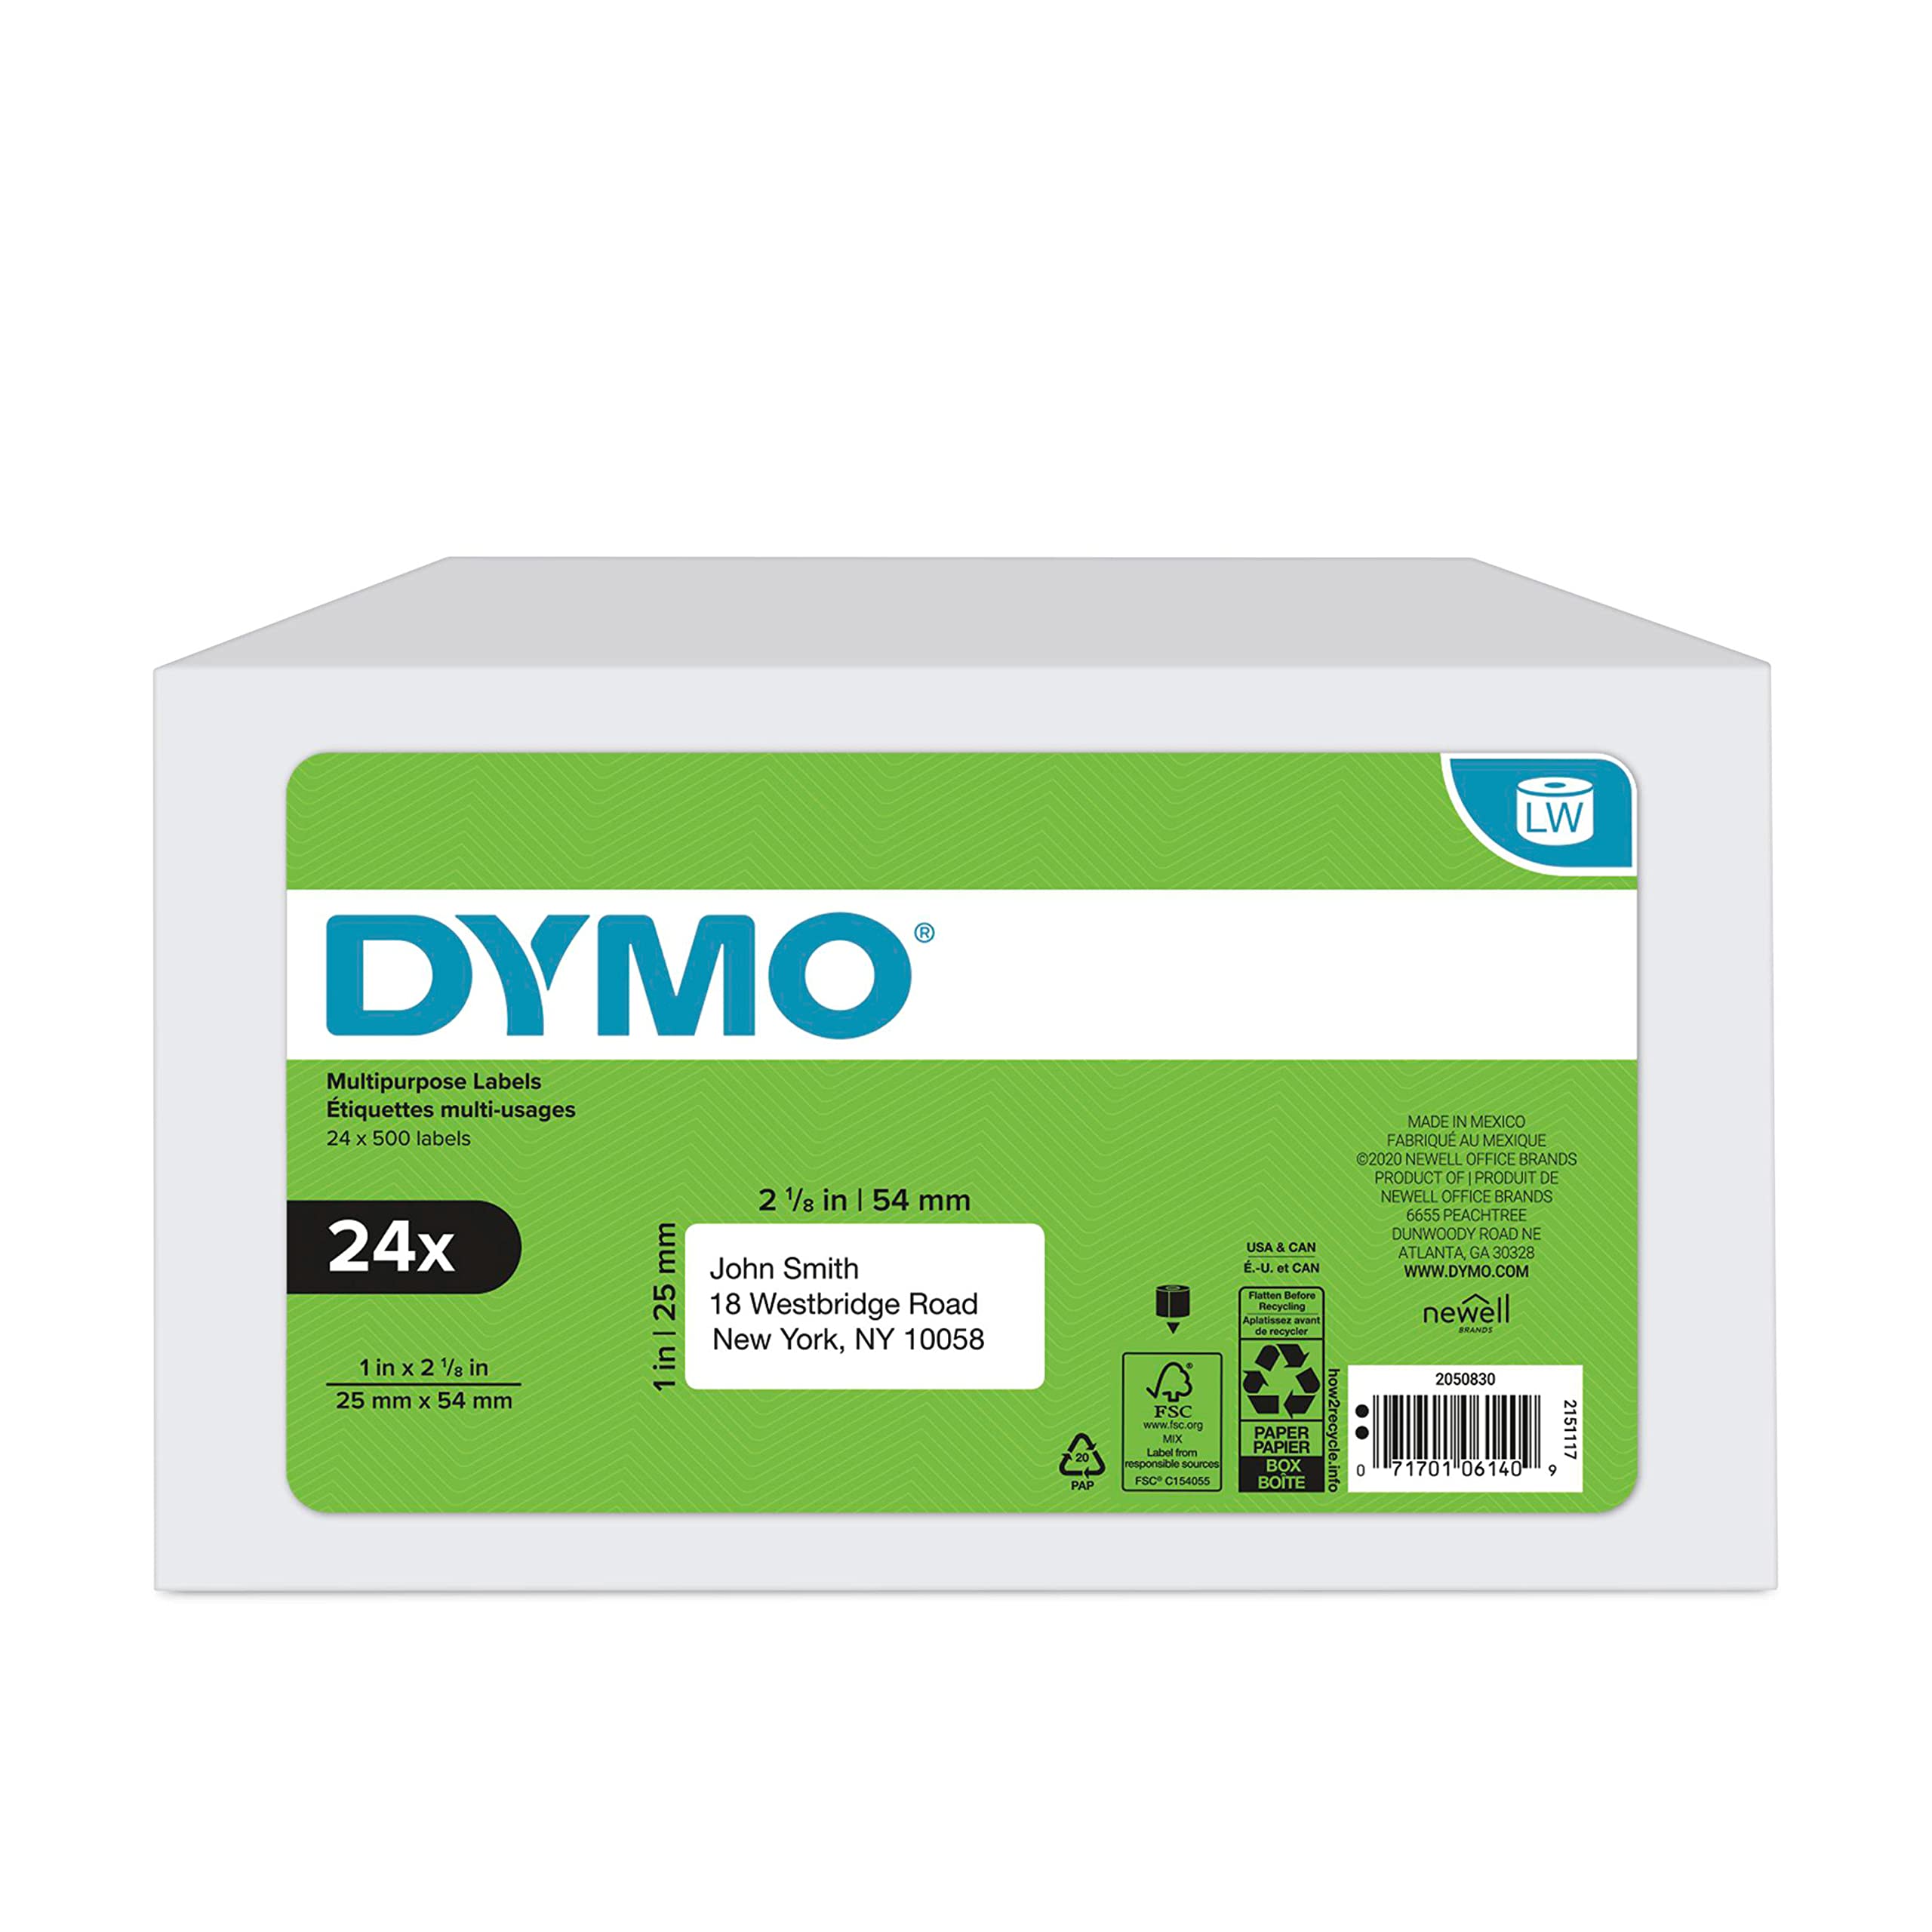 DYMO Authentic LabelWriter Multi-Purpose Labels for Lab...